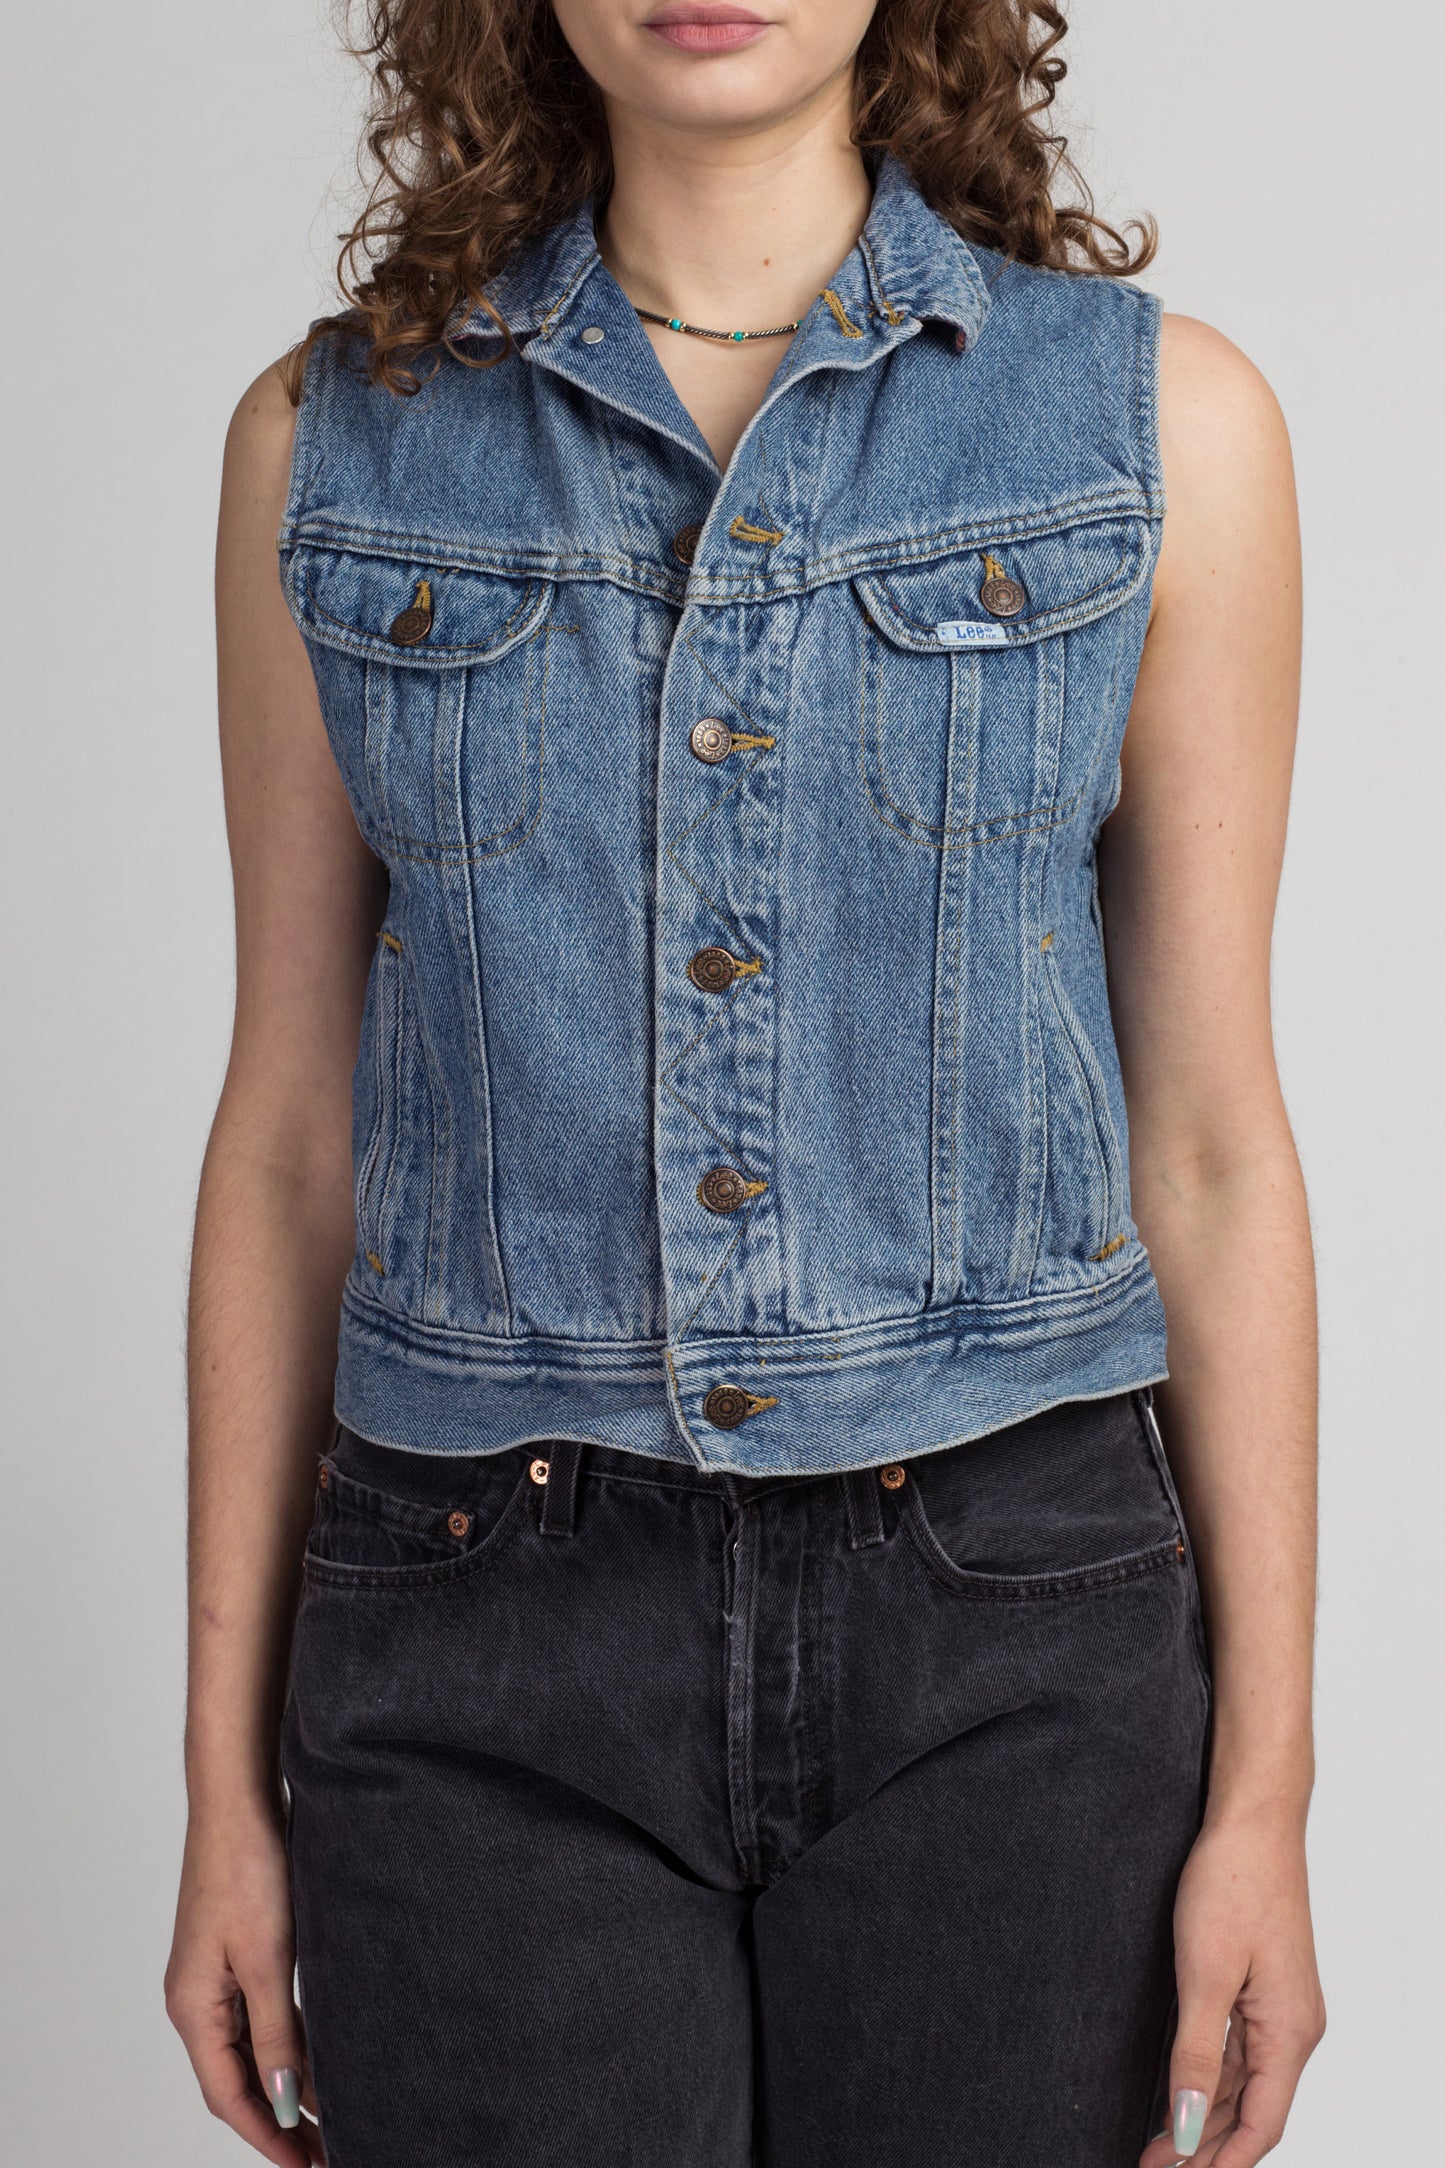 90s Lee Flannel-Lined Denim Vest - Small | Vintage Blue Jean Sleeveless Button Up Cropped Top